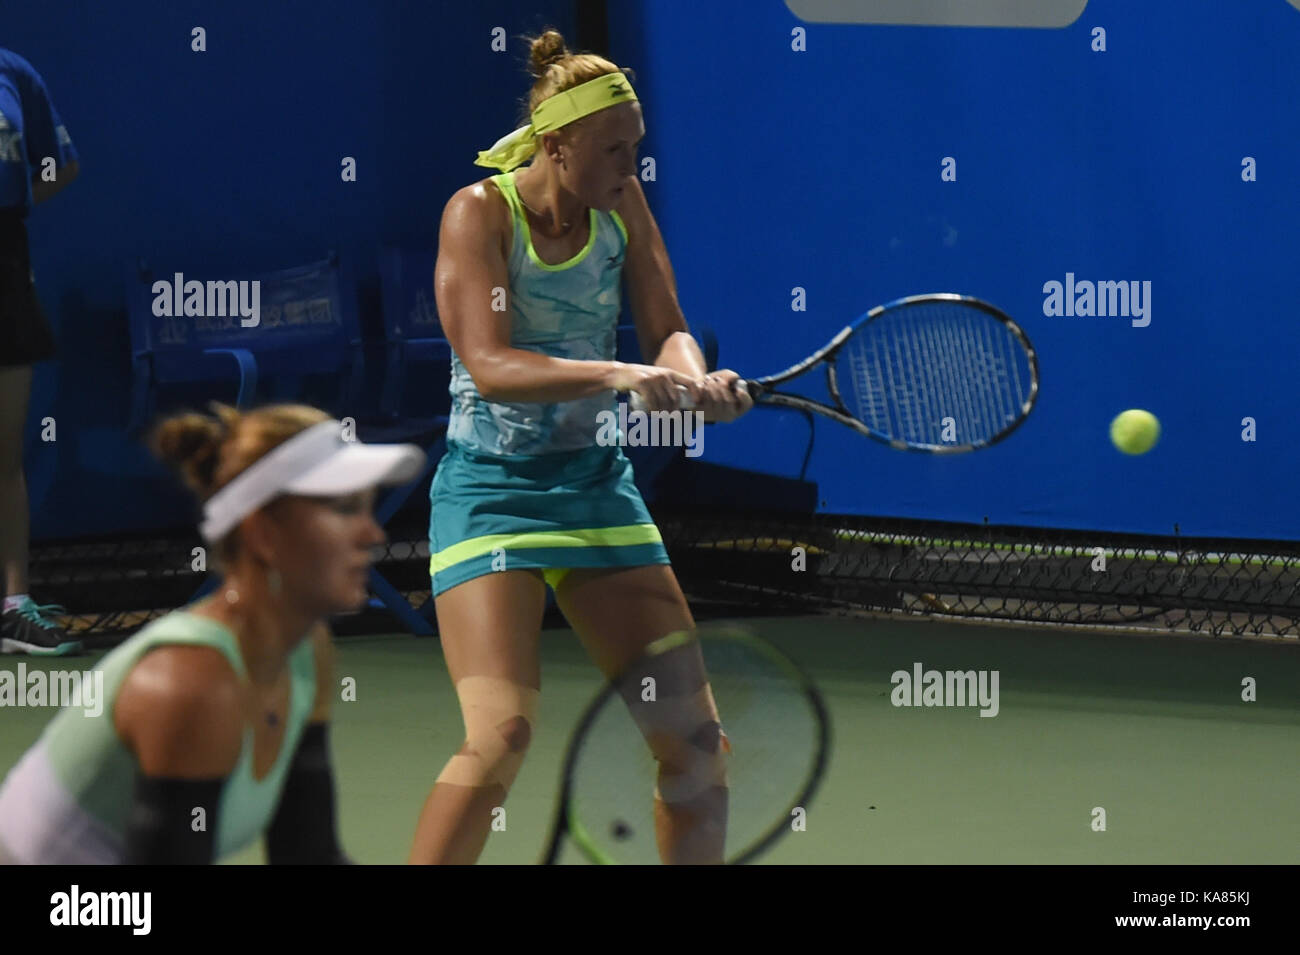 Wuhan, China. 25th September, 2017. Nicole Melichar (L) of the United States and Anna Smith of Britain compete during the doubles first round match against Daria Gavrilova of Australia and Barbora Strycova of Czezh Republic at 2017 WTA Wuhan Open in Wuhan, capital of central China's Hubei Province, on Sept. 25, 2017. Nicole Melichar and Anna Smith won 2-0. Credit: Xinhua/Alamy Live News Stock Photo